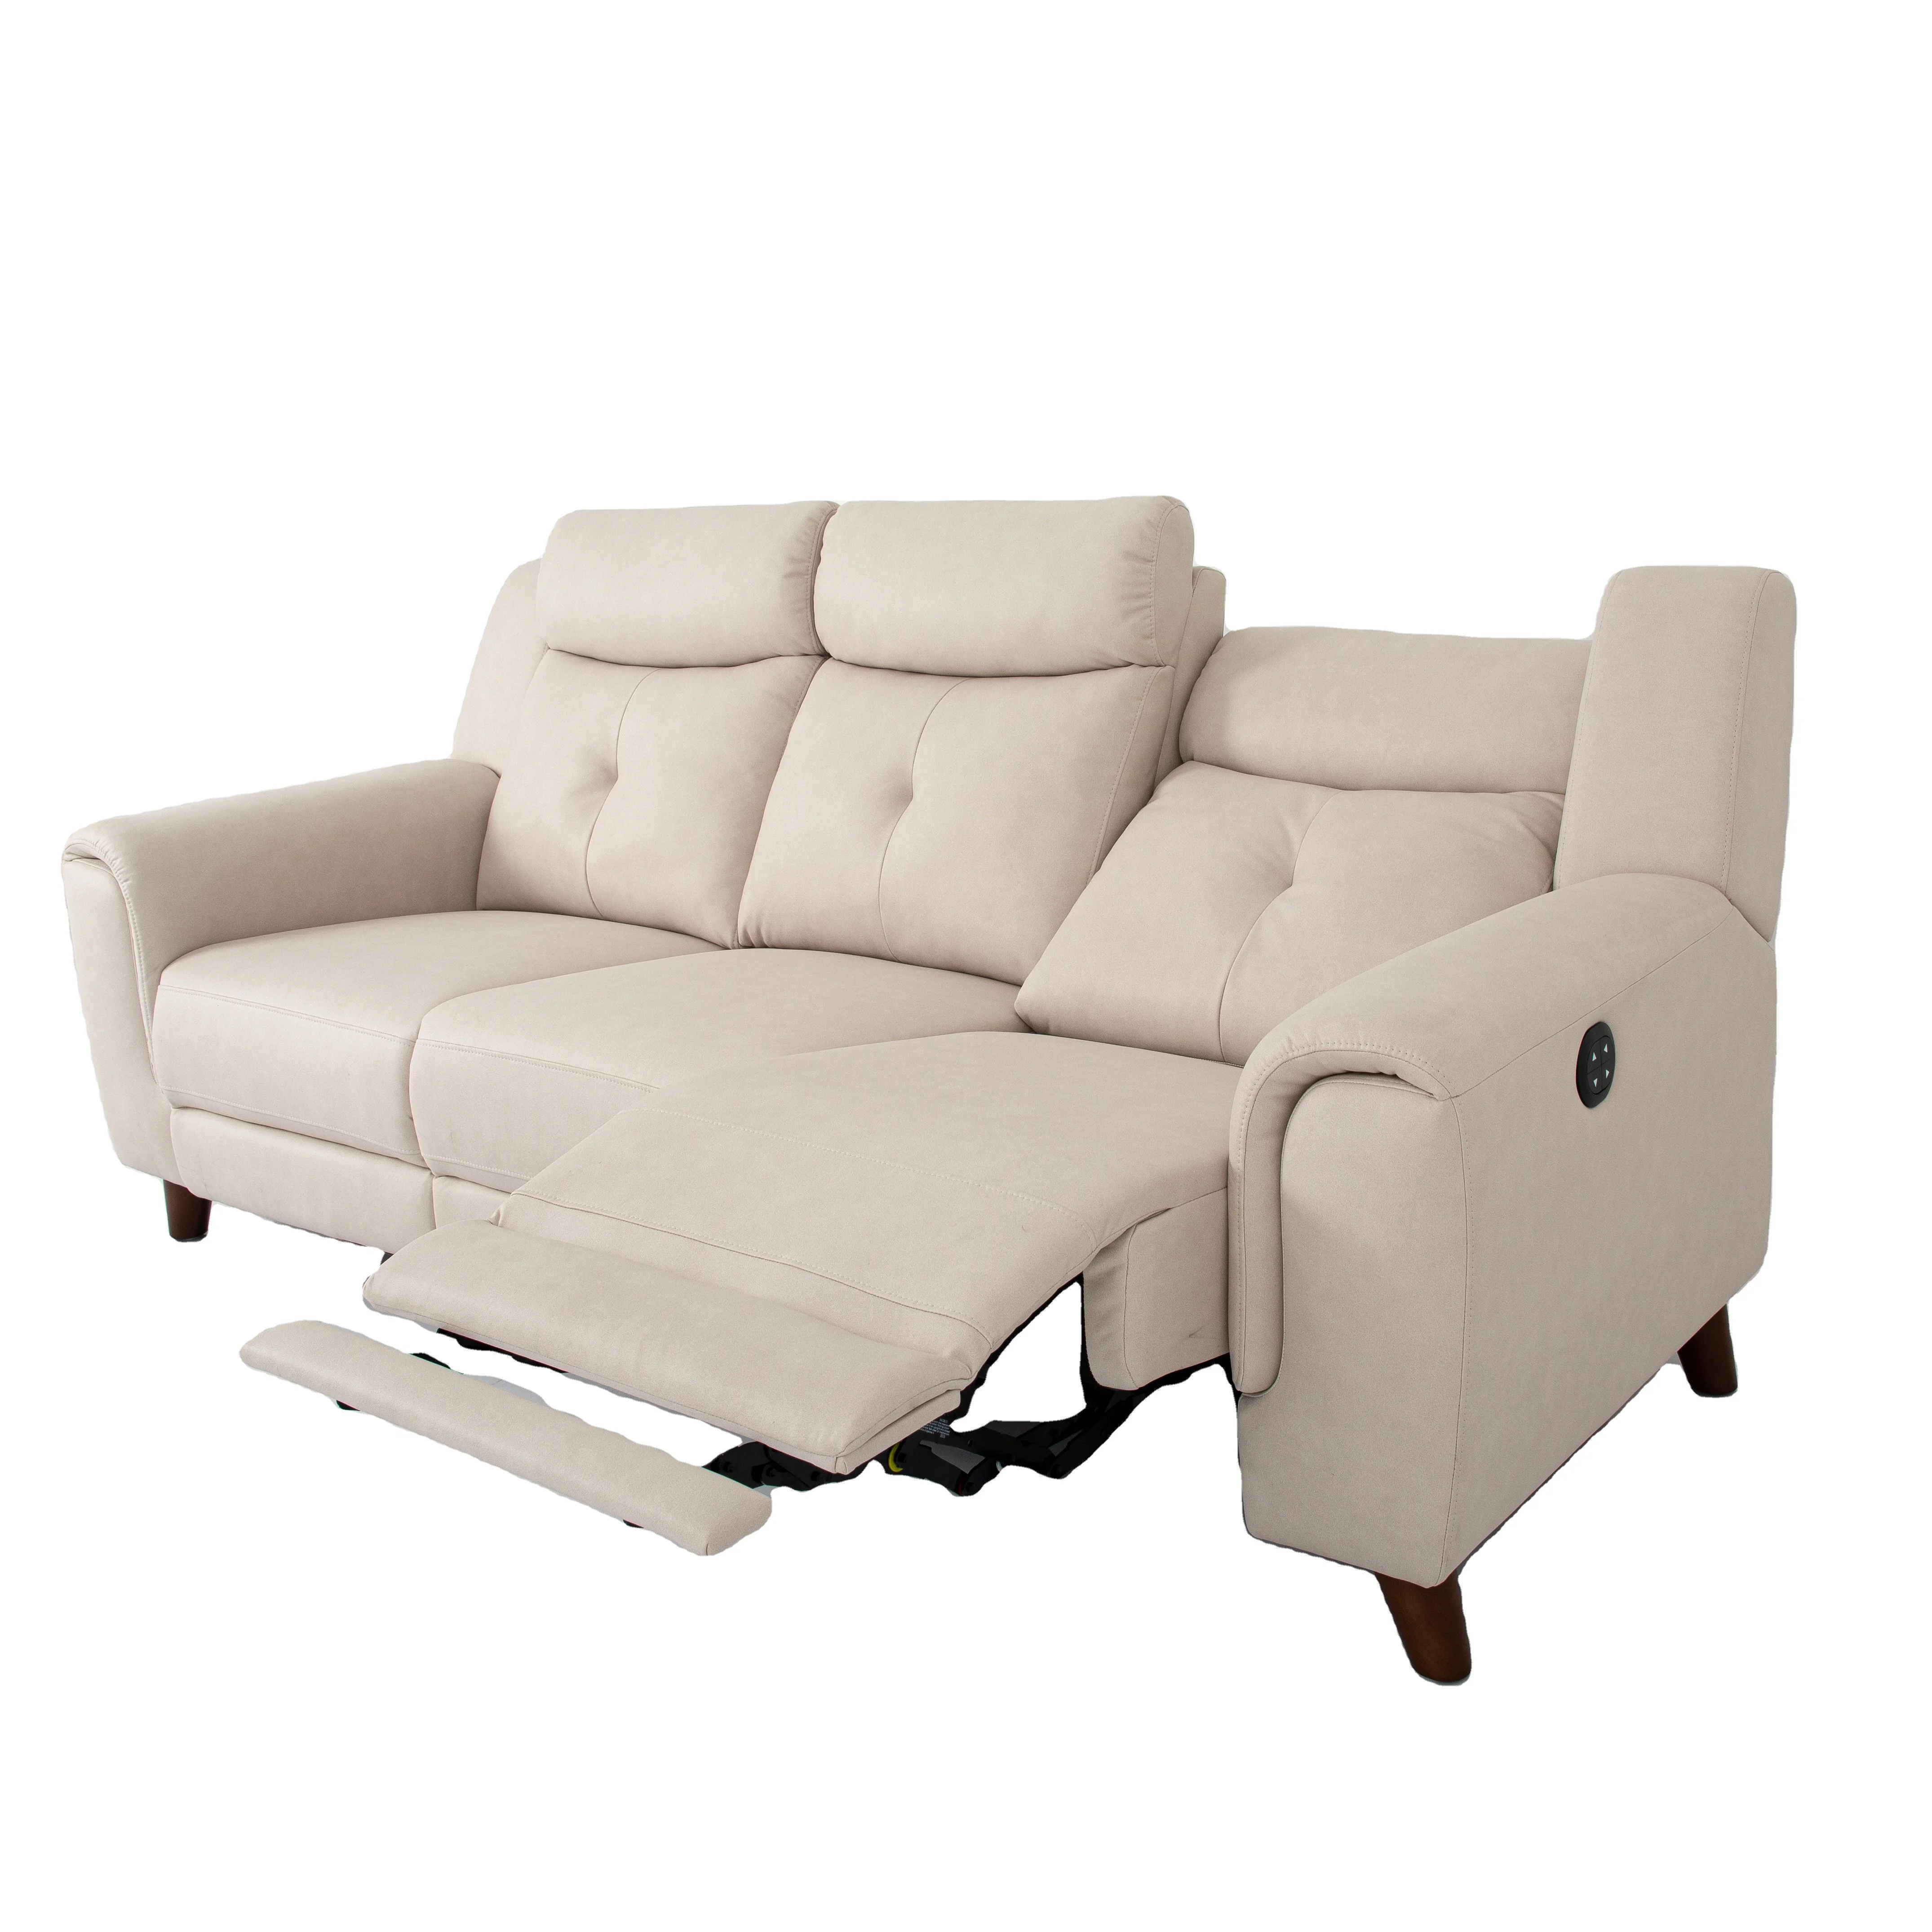 Wholesale living room sofa Recliner multifunction soft leather sofa chair